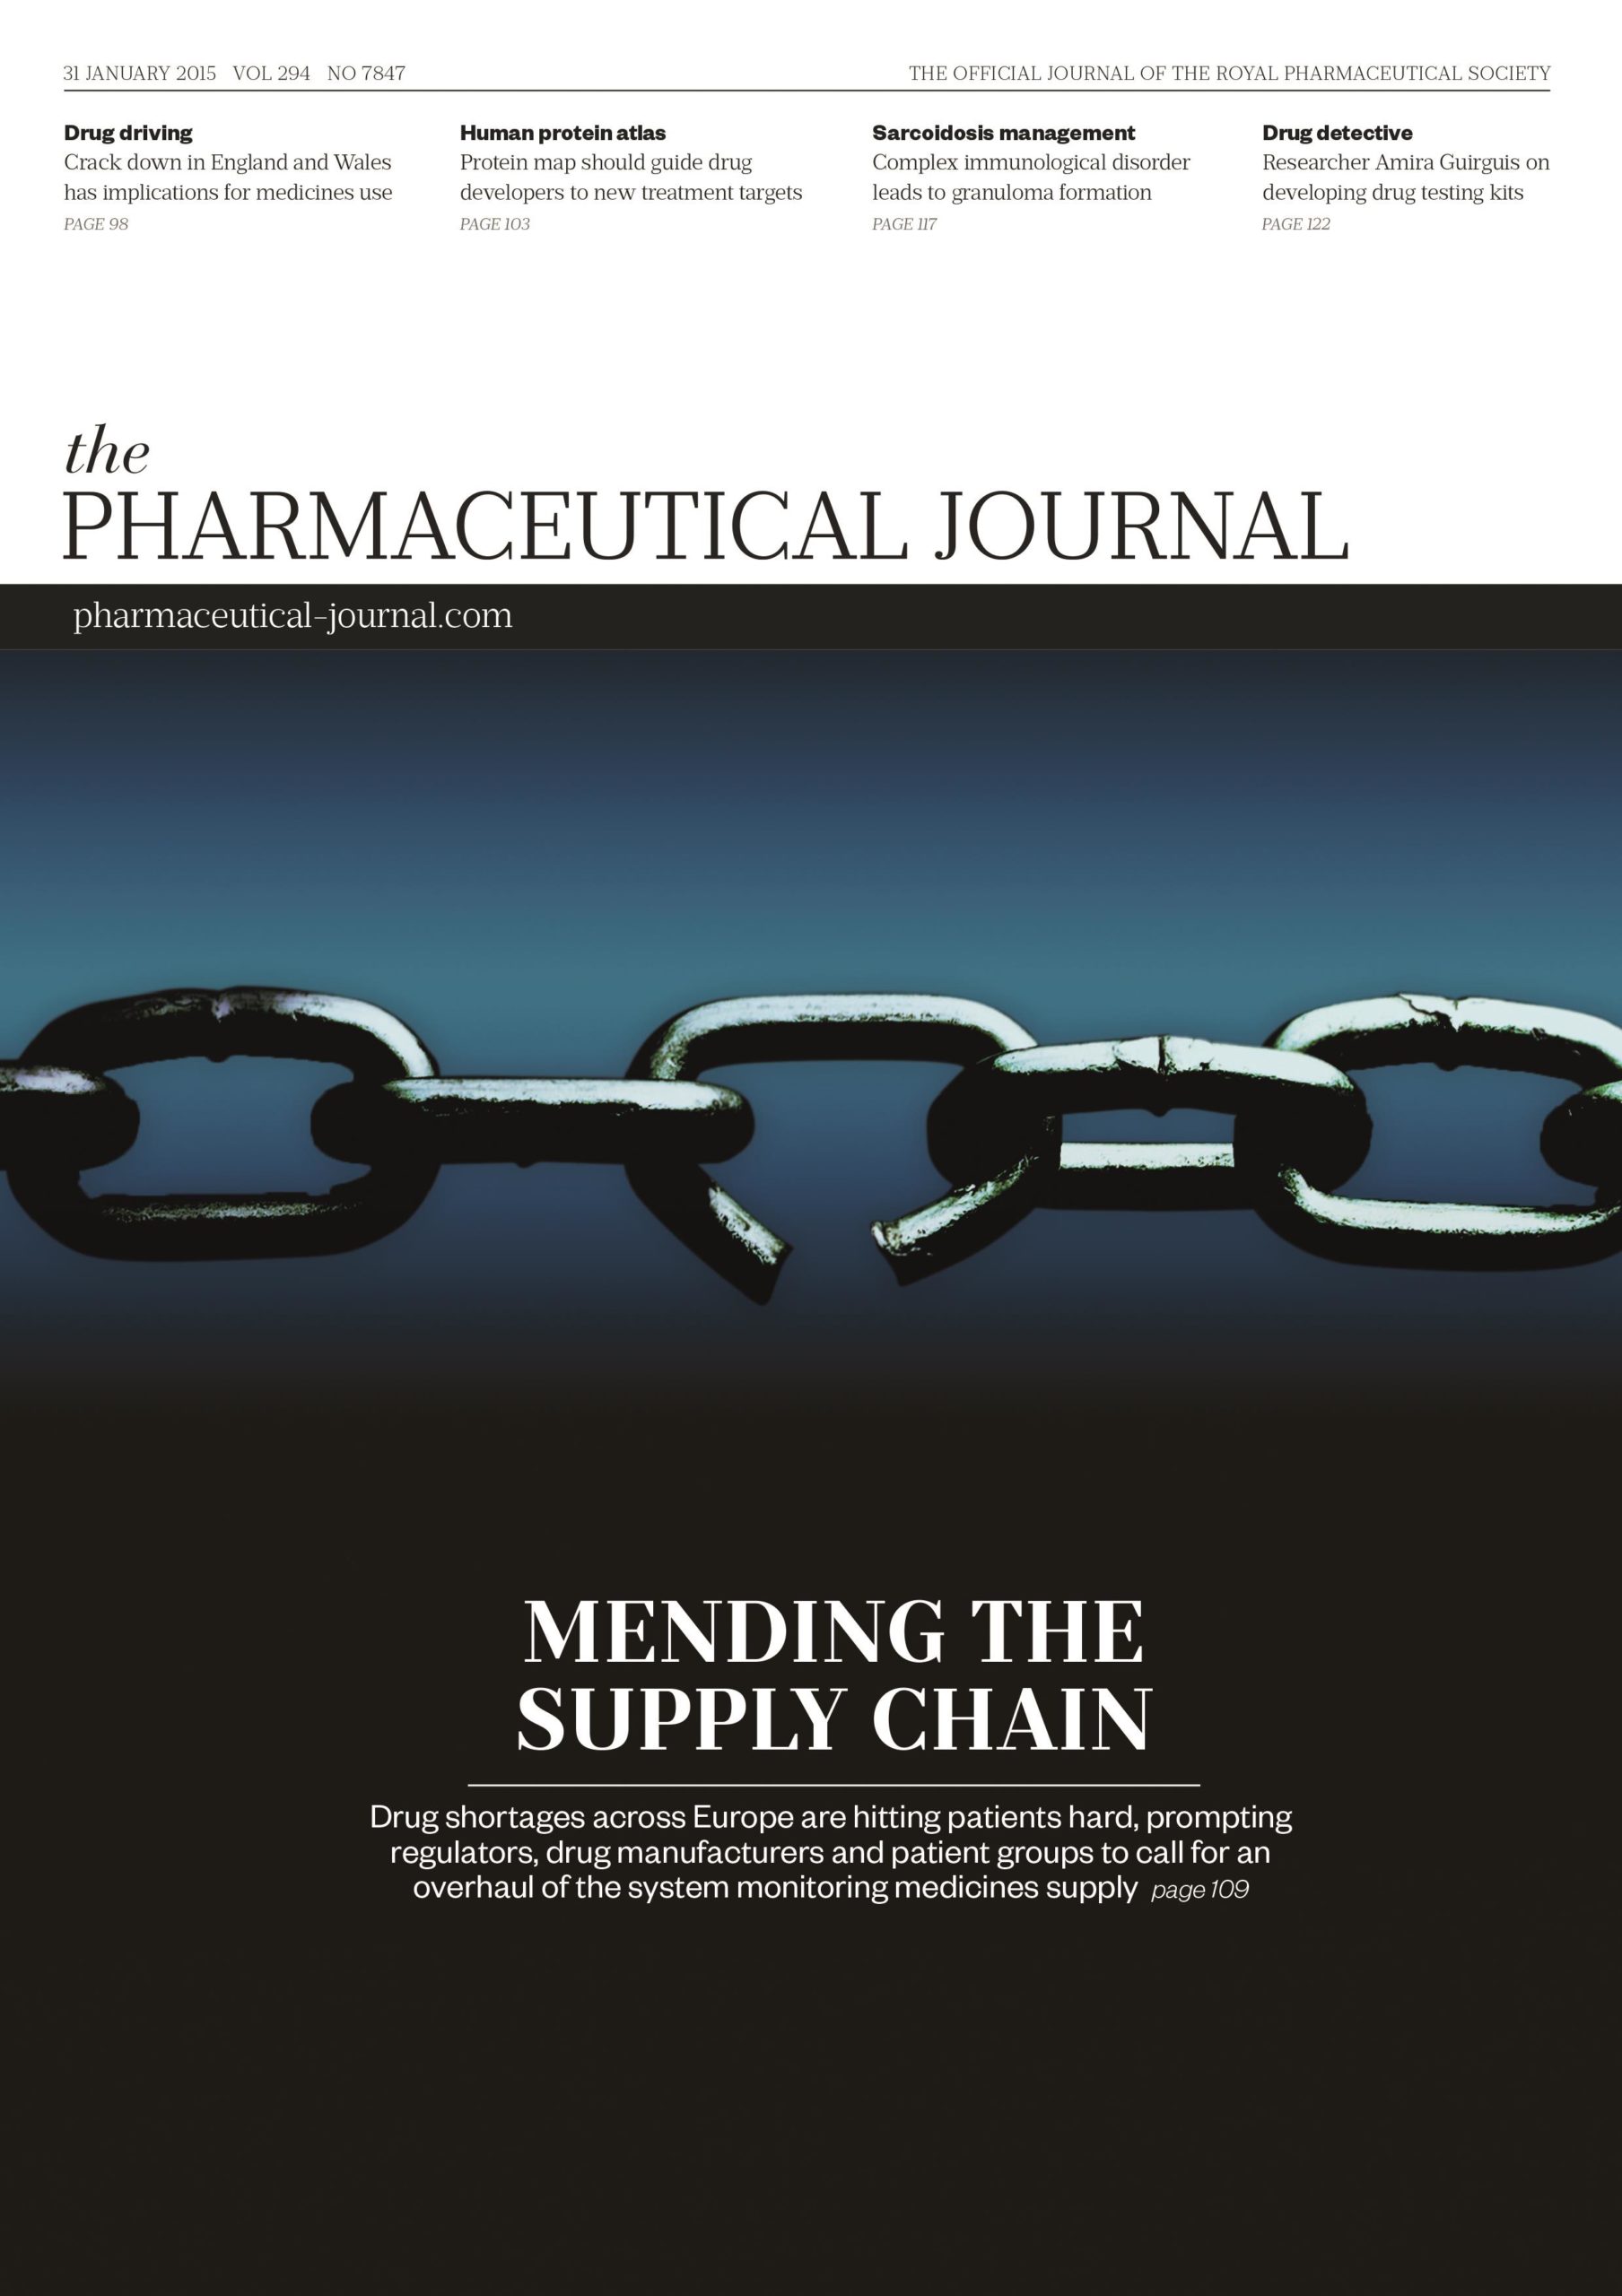 Publication issue cover for PJ, 31 January 2015, Vol 294, No 7847